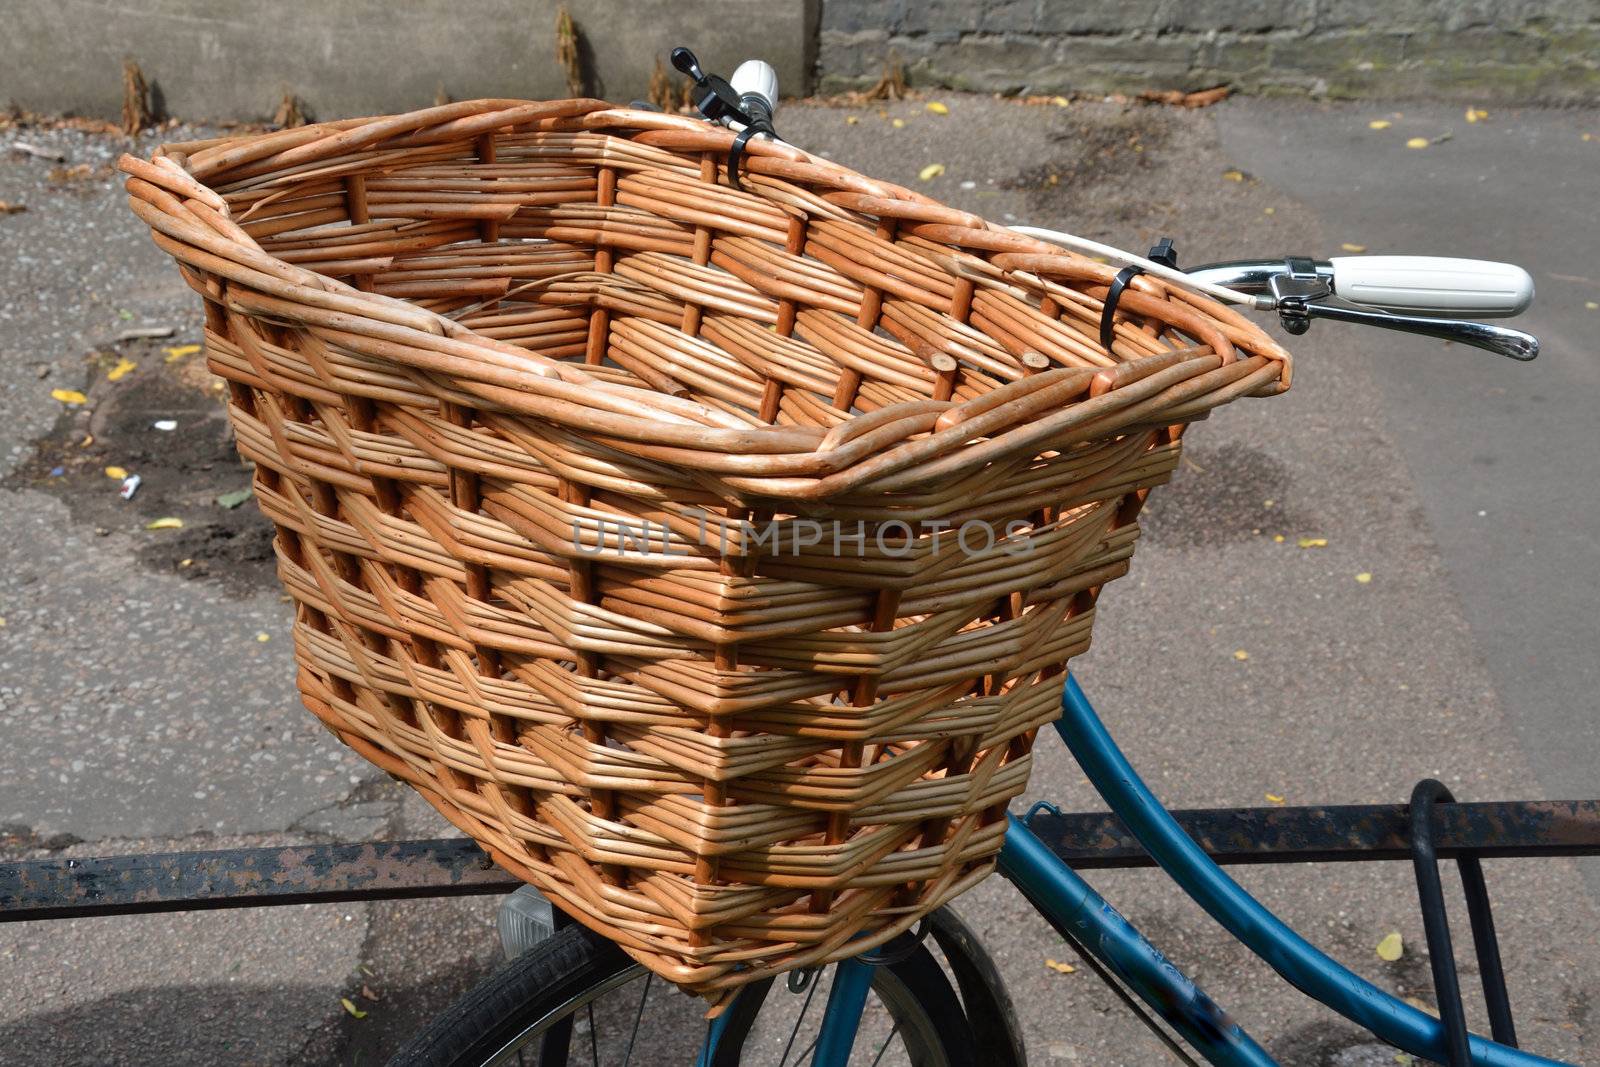 Bicycle with basket by pauws99